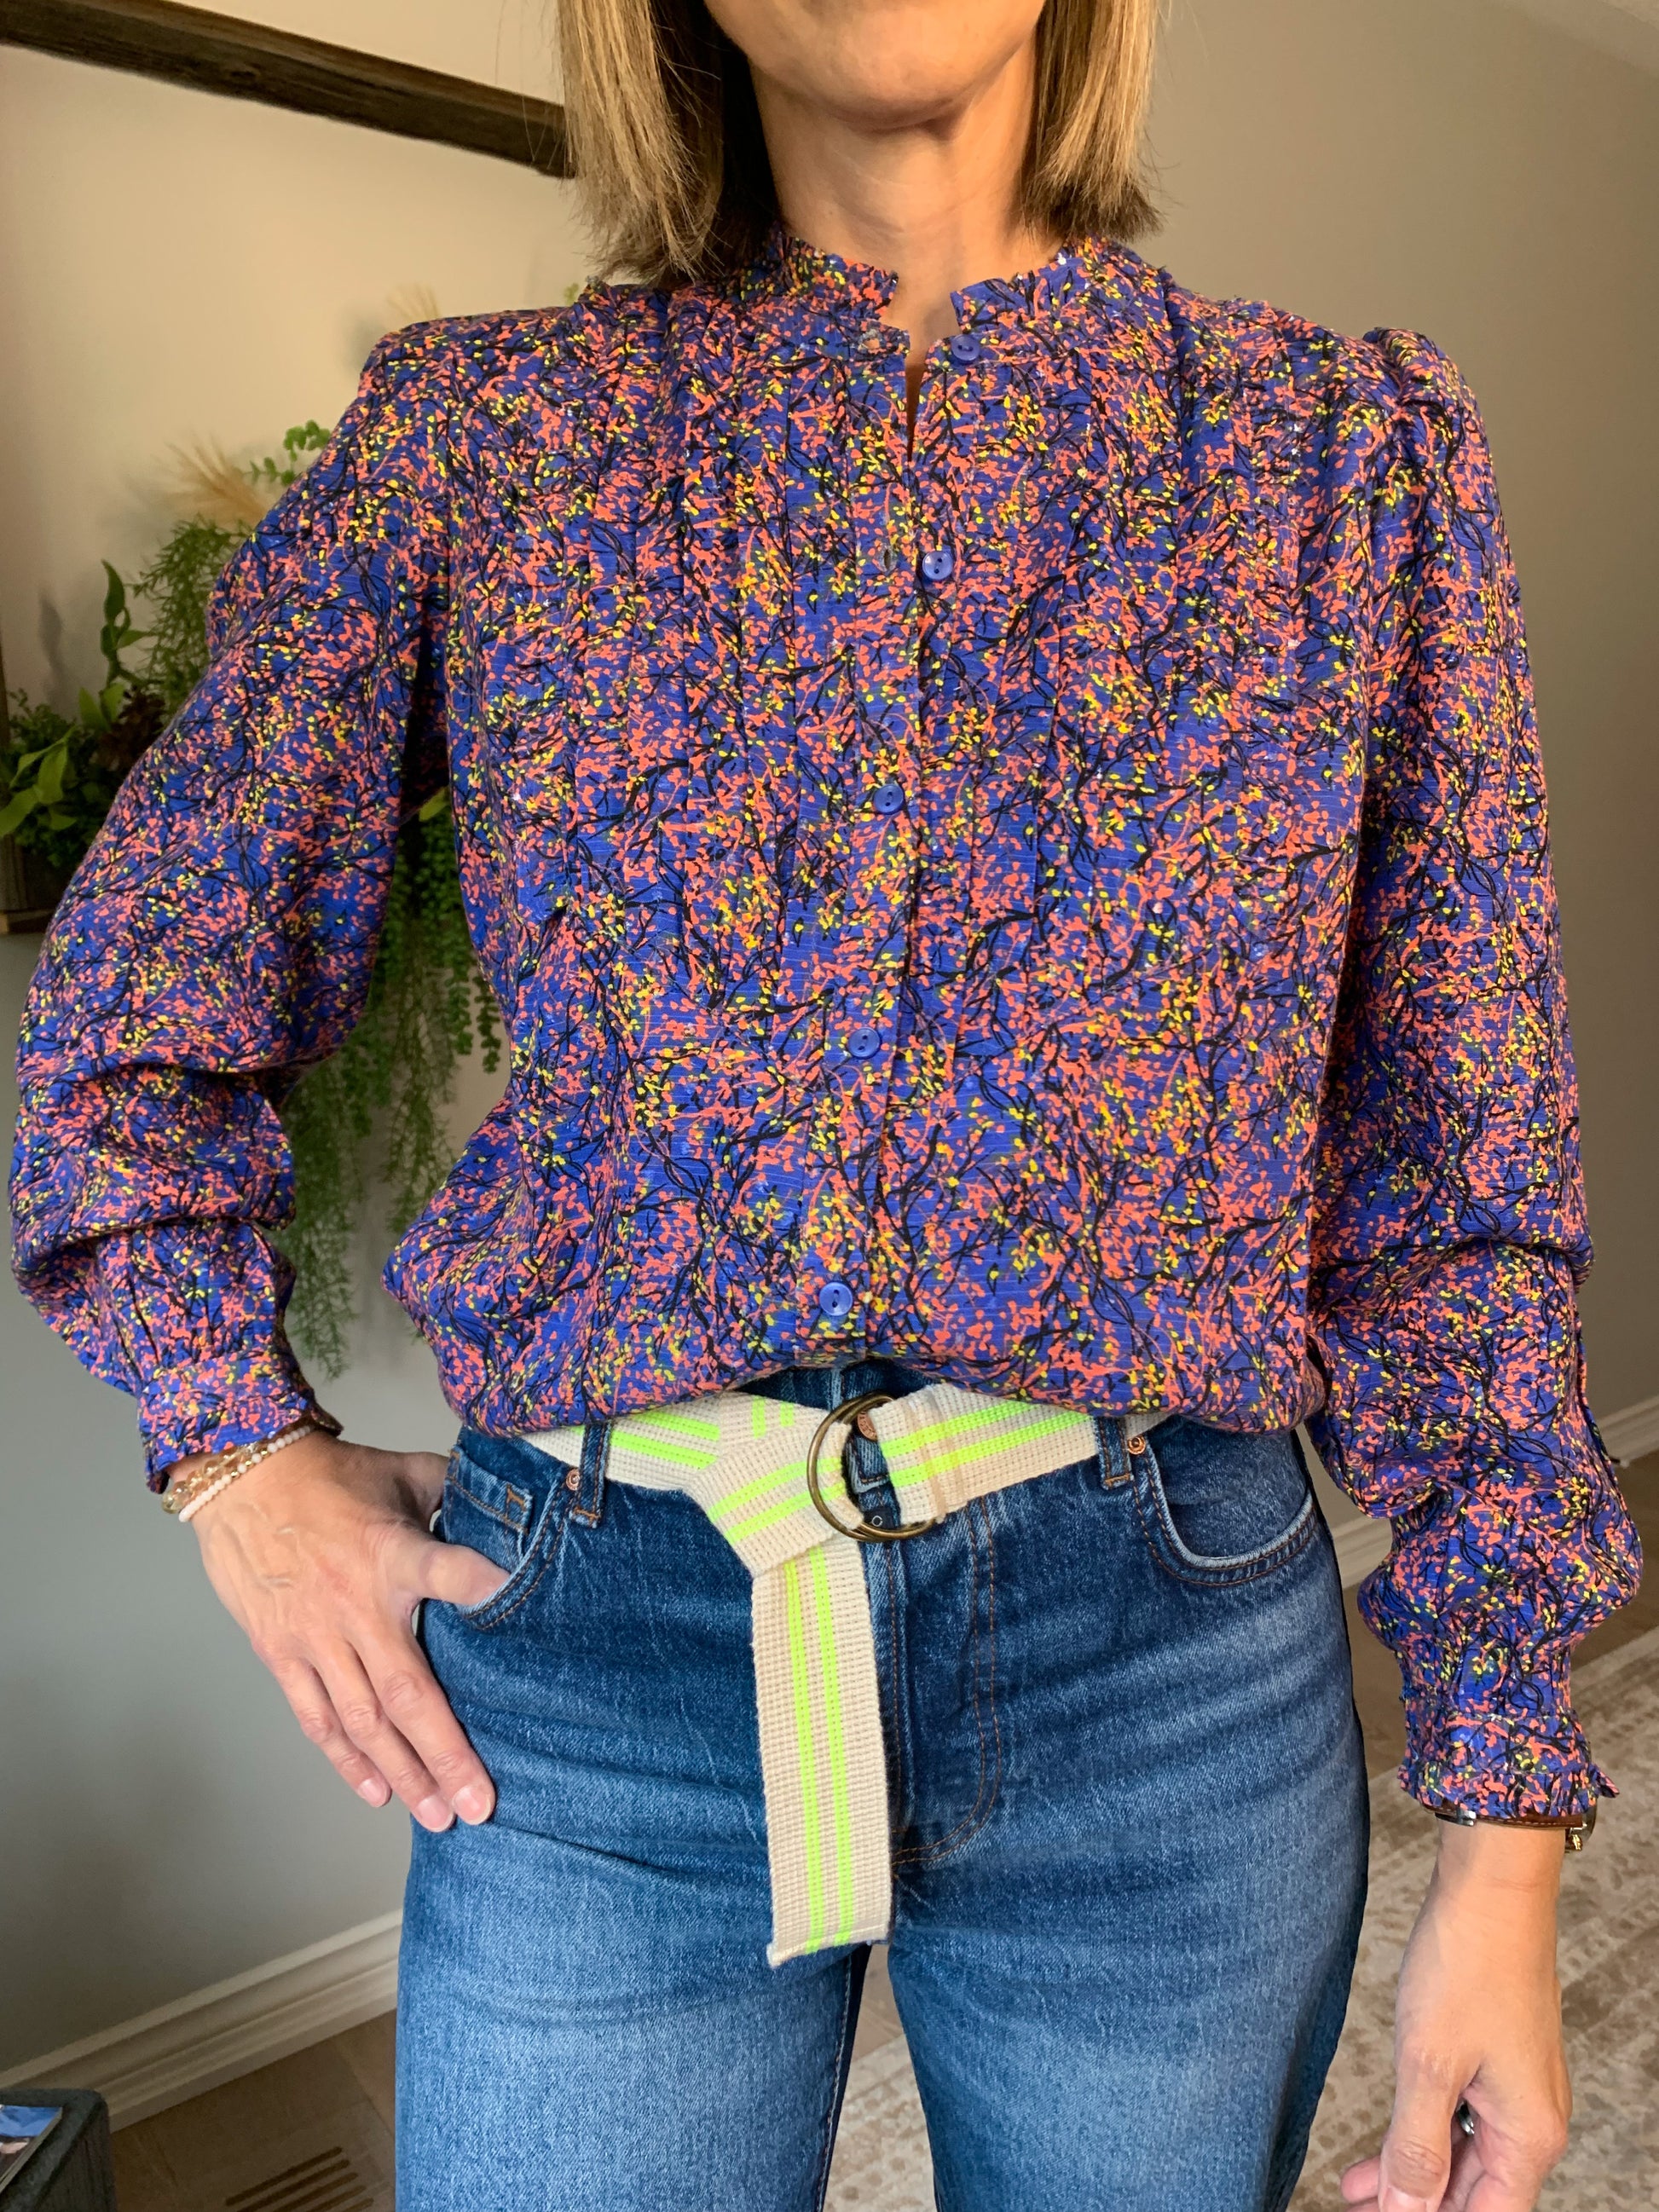 The Fawn Pintuck shirt from Thought is an eye-catching piece crafted from sustainable fabrics. Featuring a periwinkle blue hue with a nature-inspired pattern and a stylish frill neck, this blouse is elevated by pintuck details at the front and subtle puff sleeves.  lemon cyprus boutique